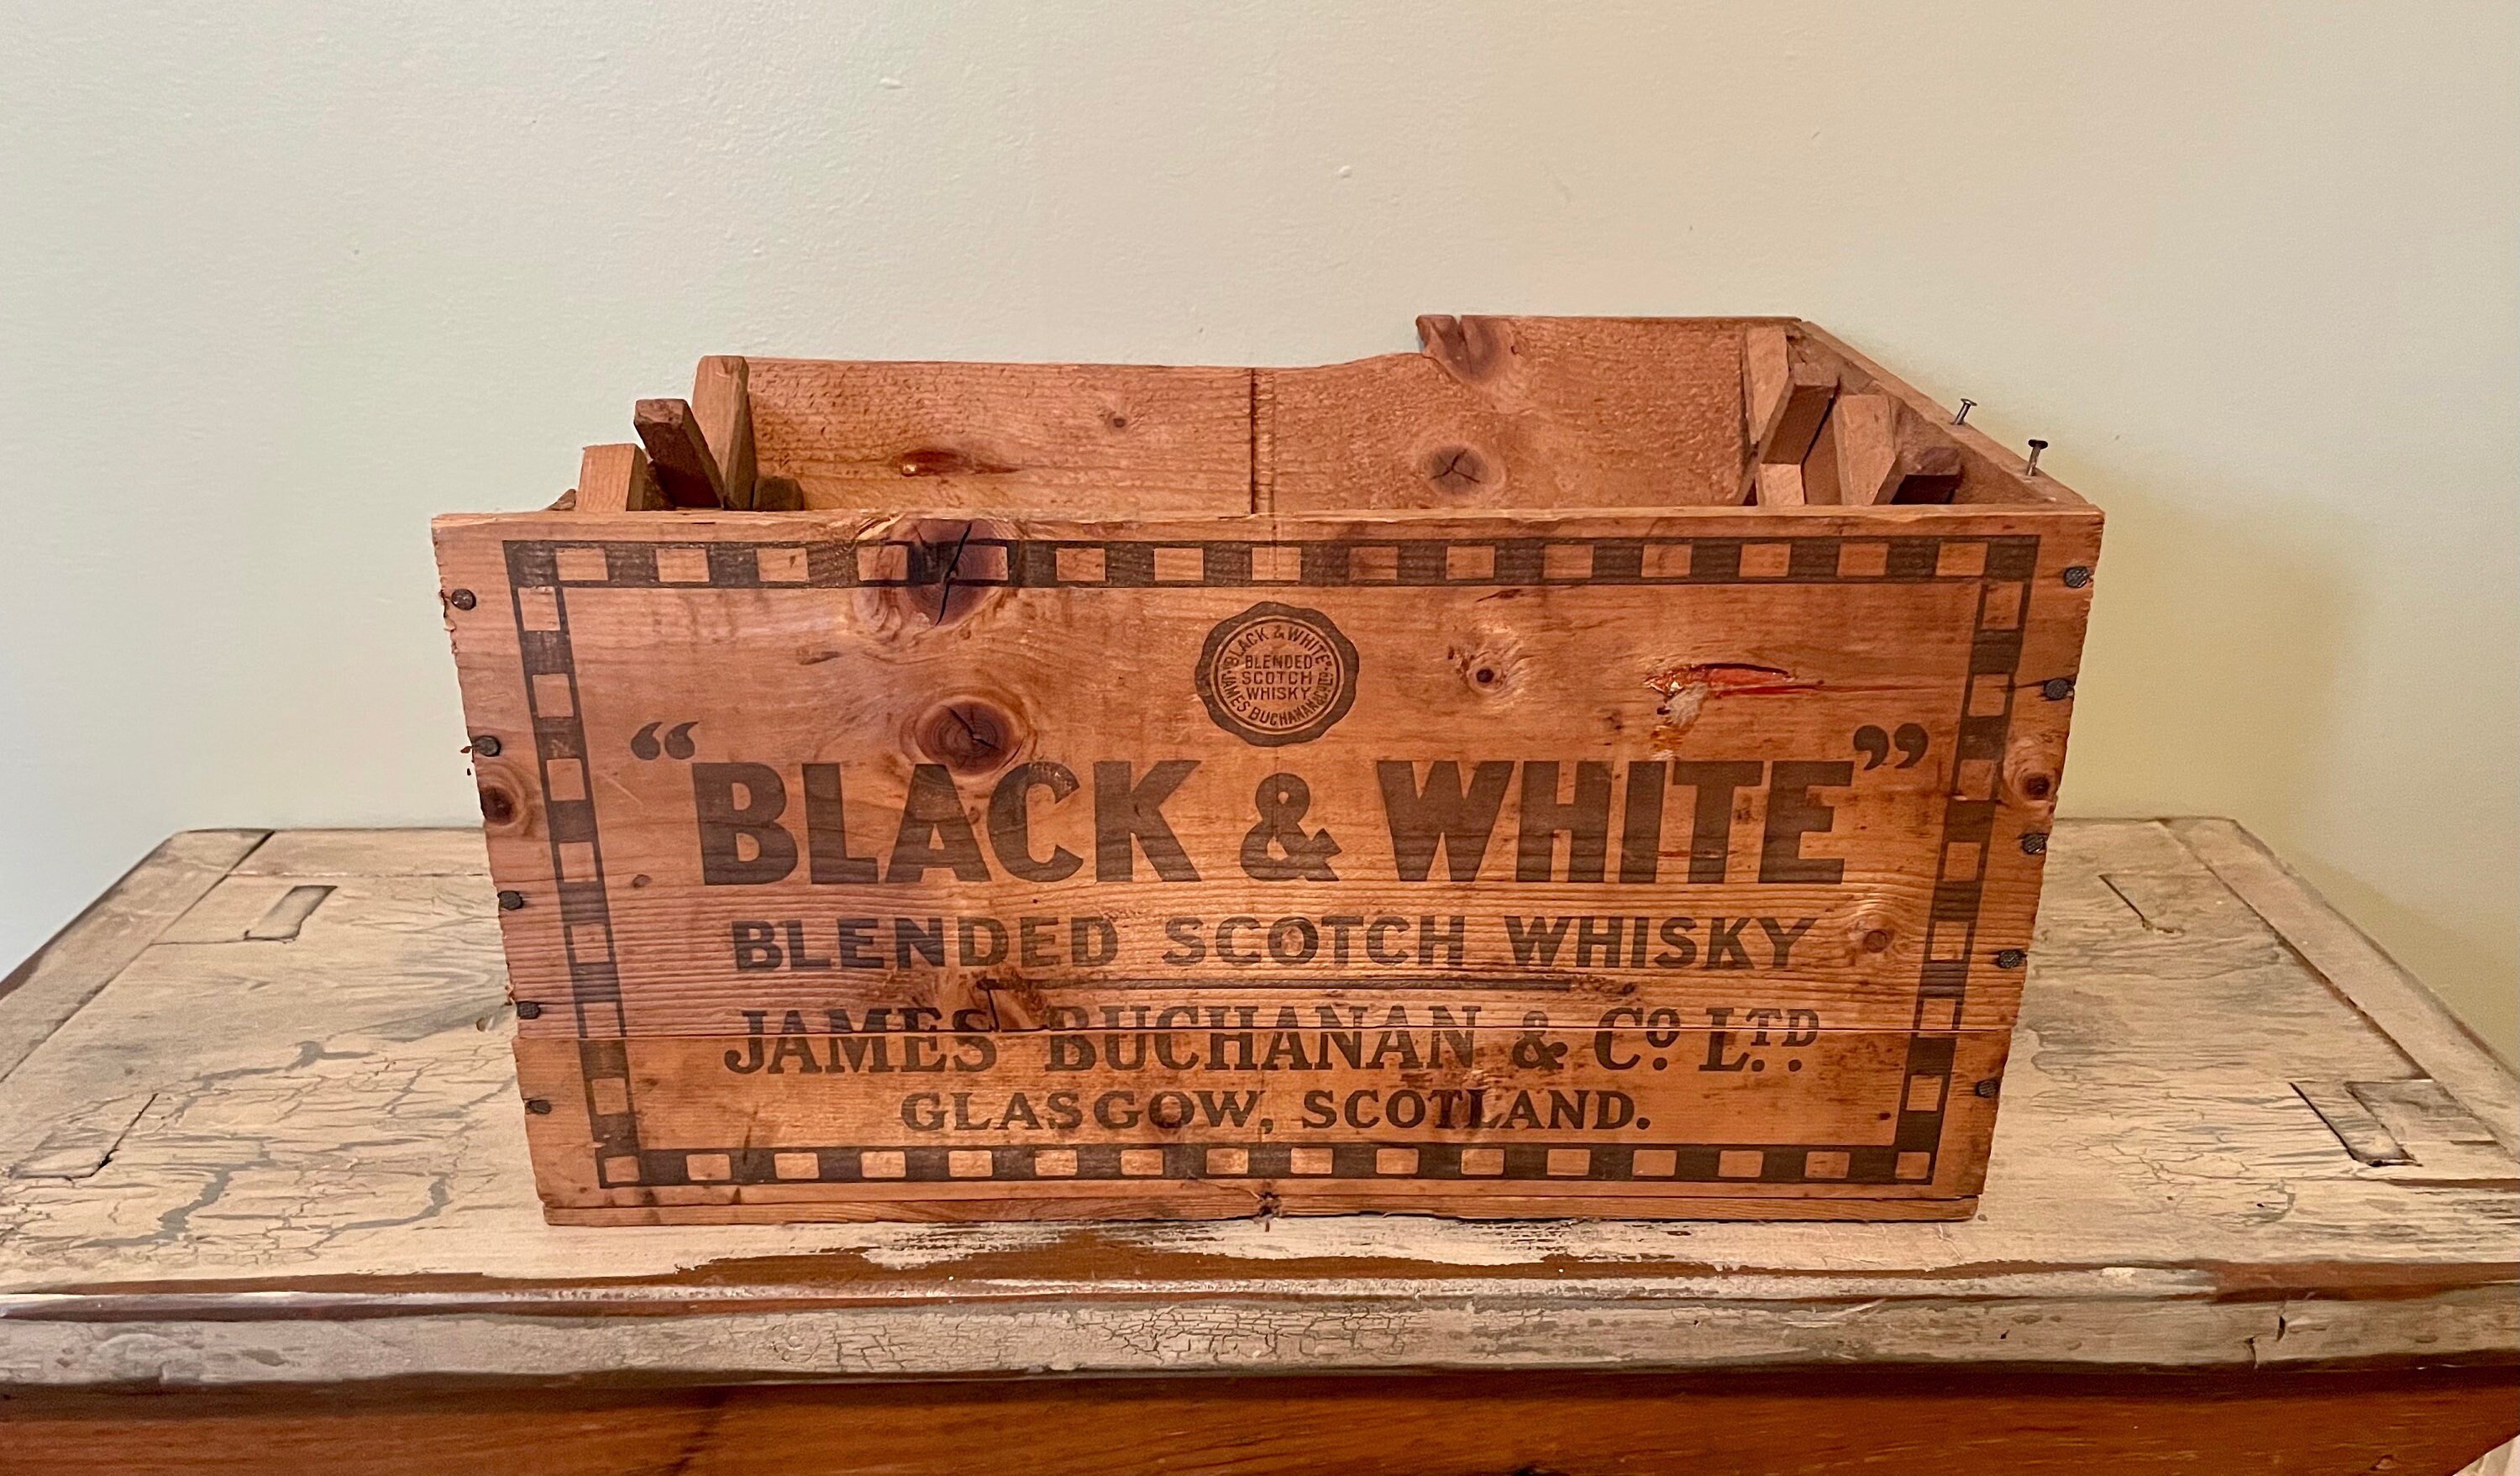 1950's White Horse Cellar Scotch Wooden Whisky Crate